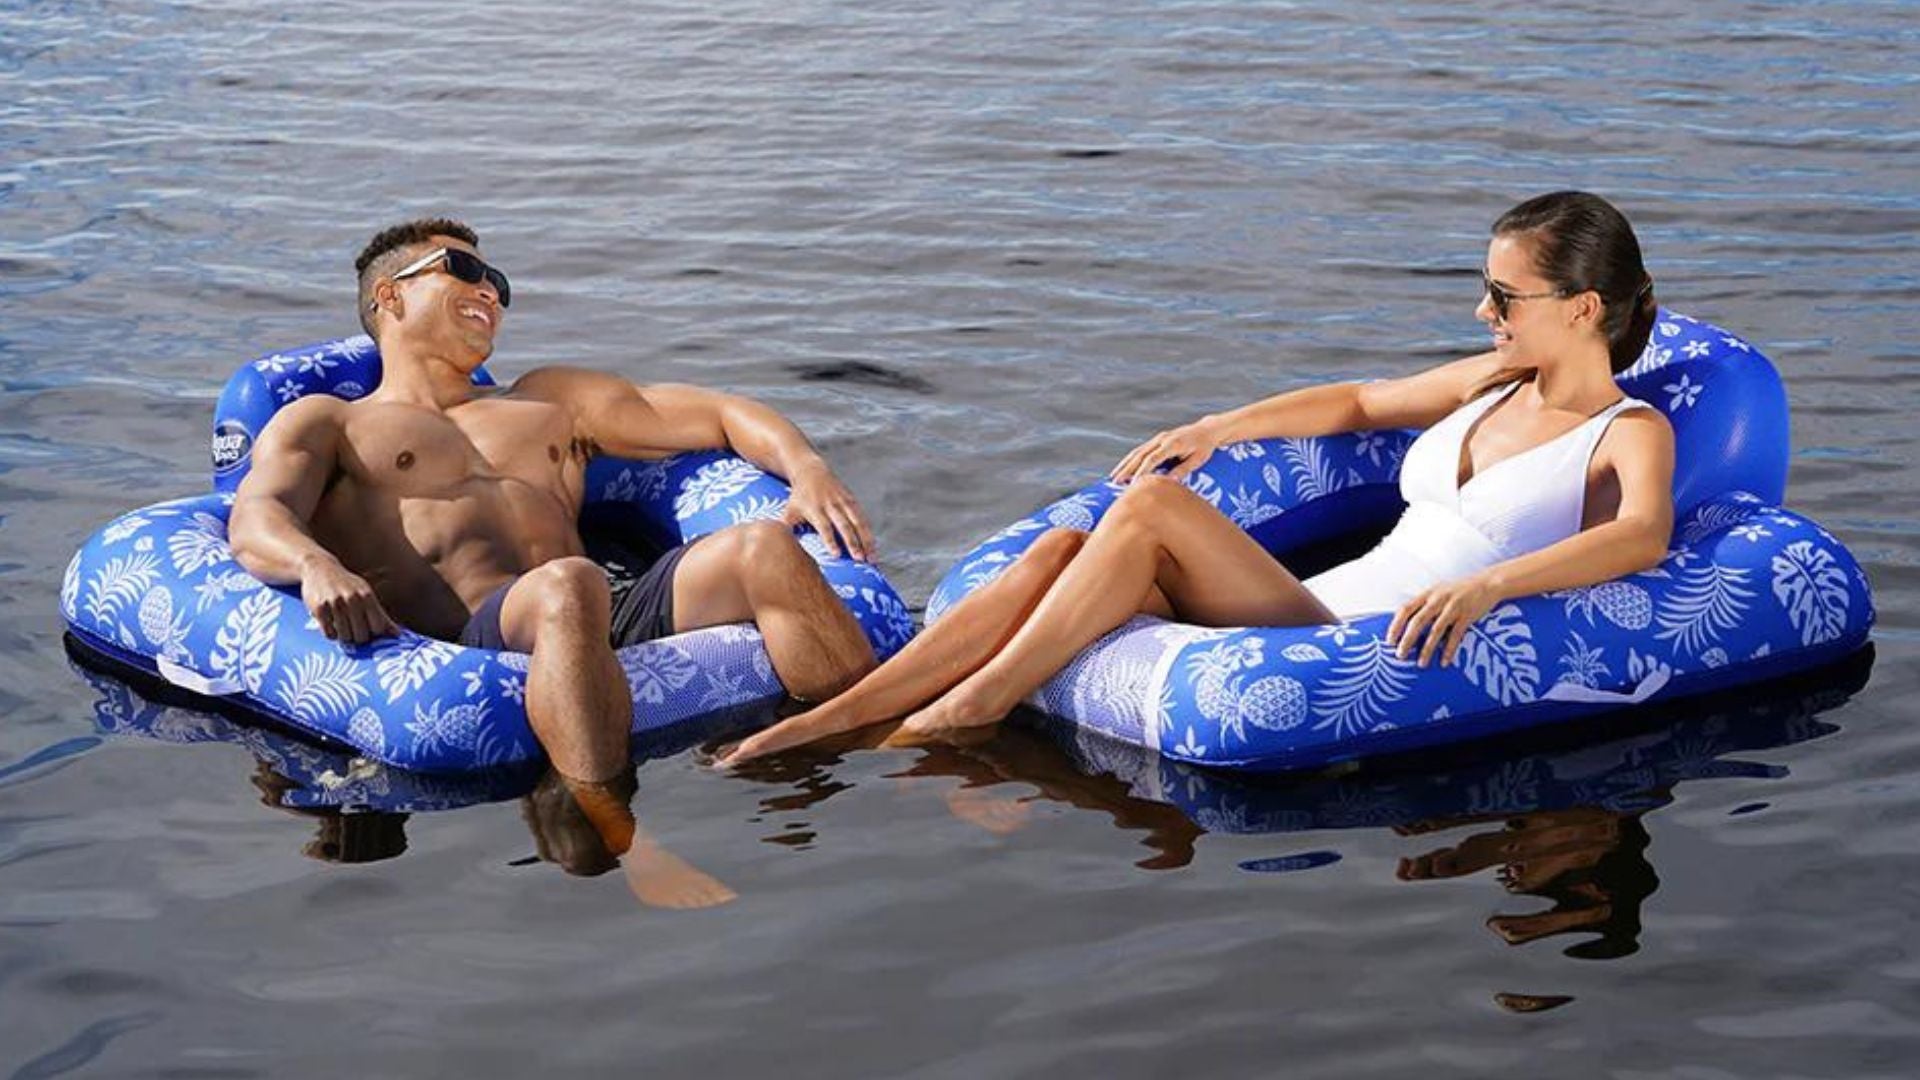 Floating Loungers